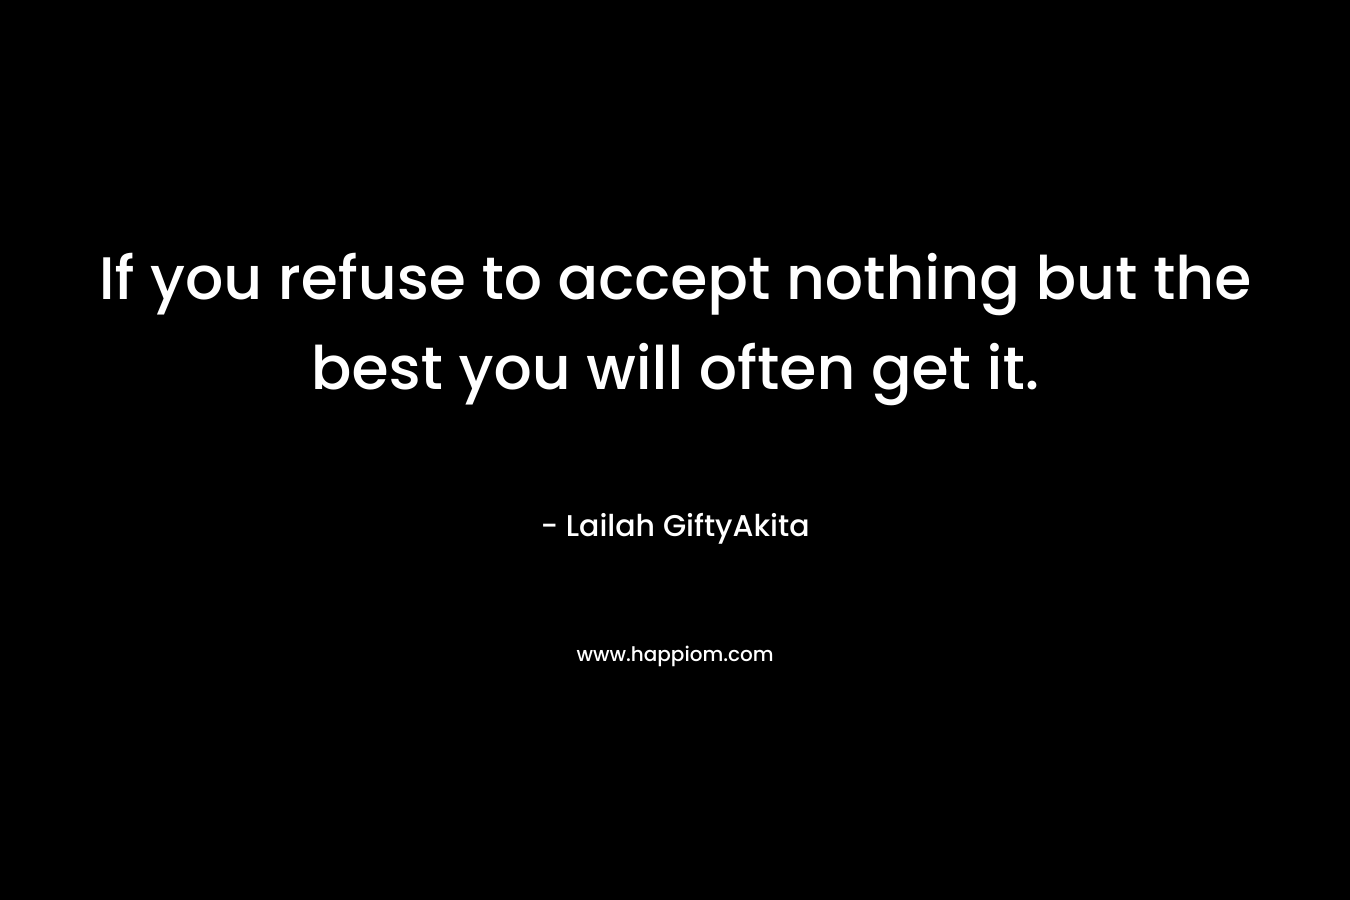 If you refuse to accept nothing but the best you will often get it.